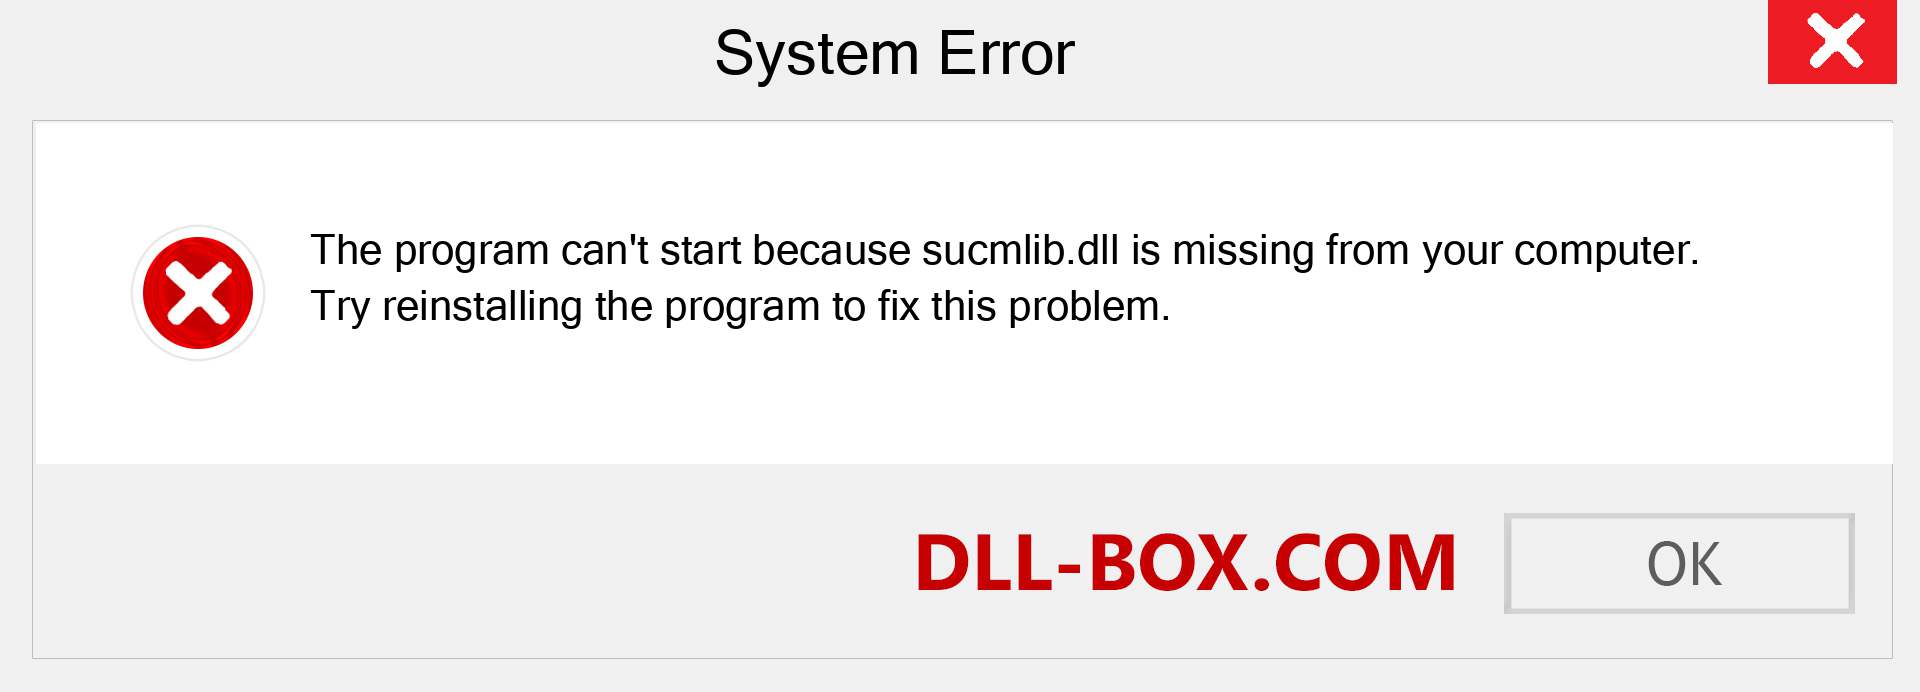  sucmlib.dll file is missing?. Download for Windows 7, 8, 10 - Fix  sucmlib dll Missing Error on Windows, photos, images